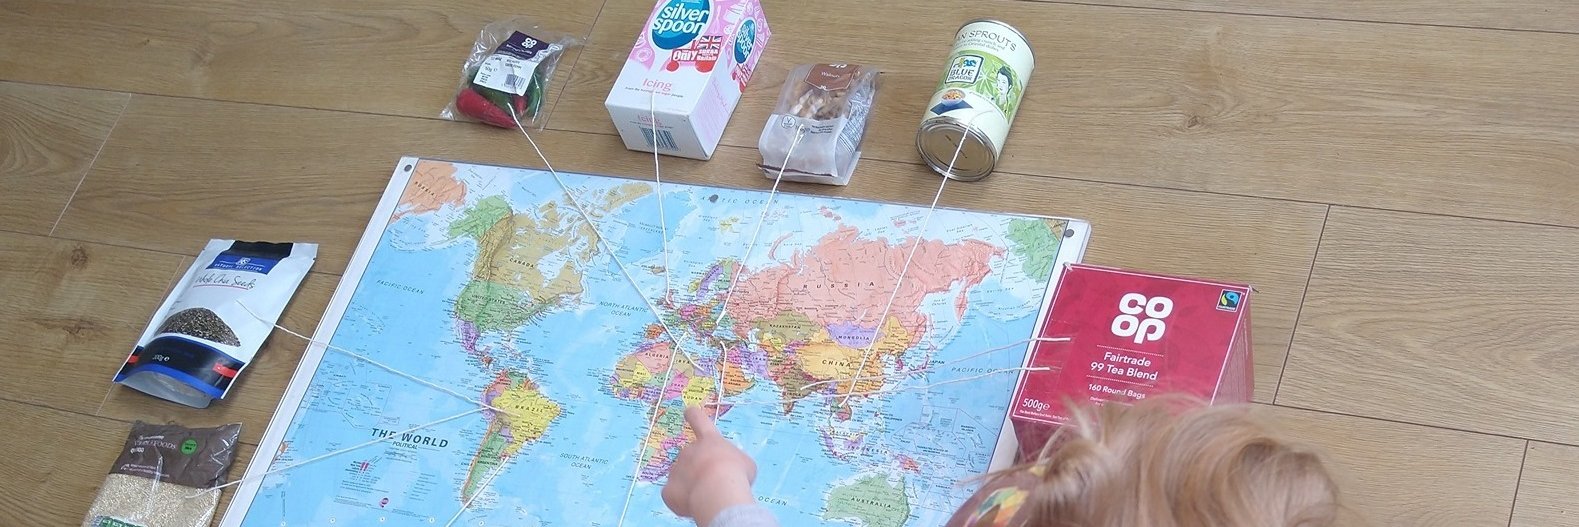 A child looks at a map of the world with pins that strings to bags of real food from their family cupboard